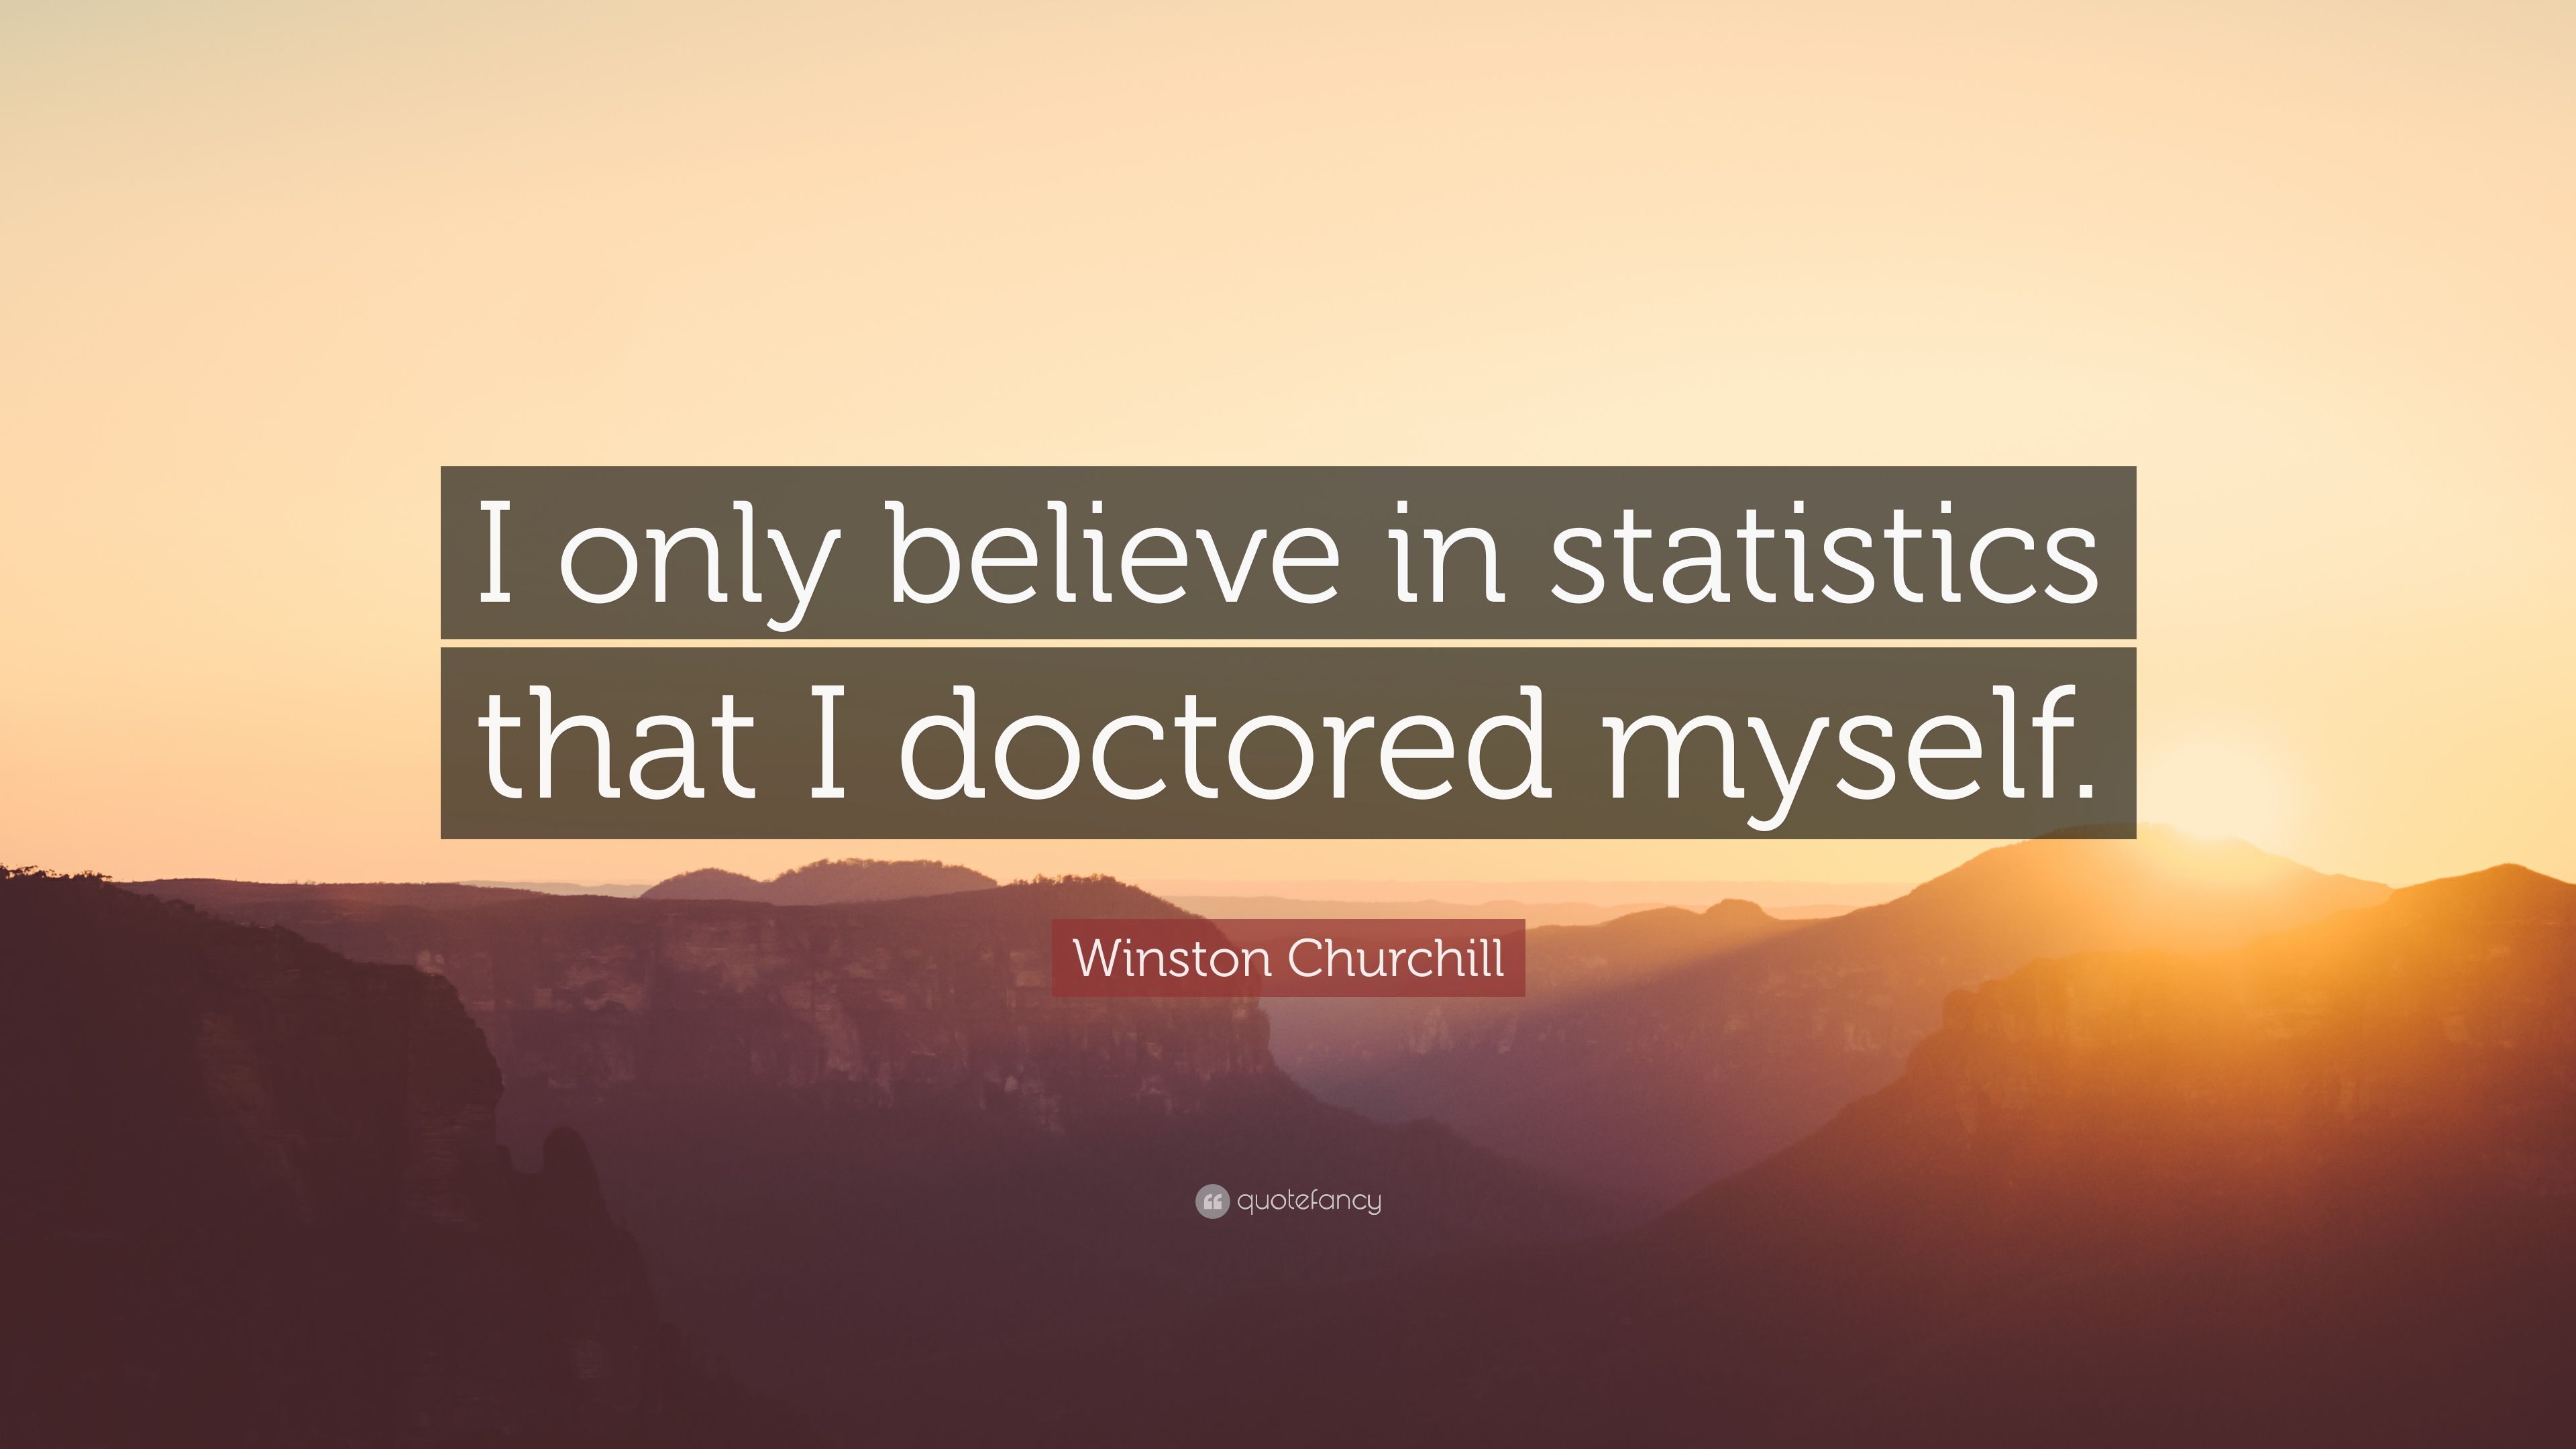 Winston Churchill Quote: “I only believe in statistics that I doctored myself.” (12 wallpaper)